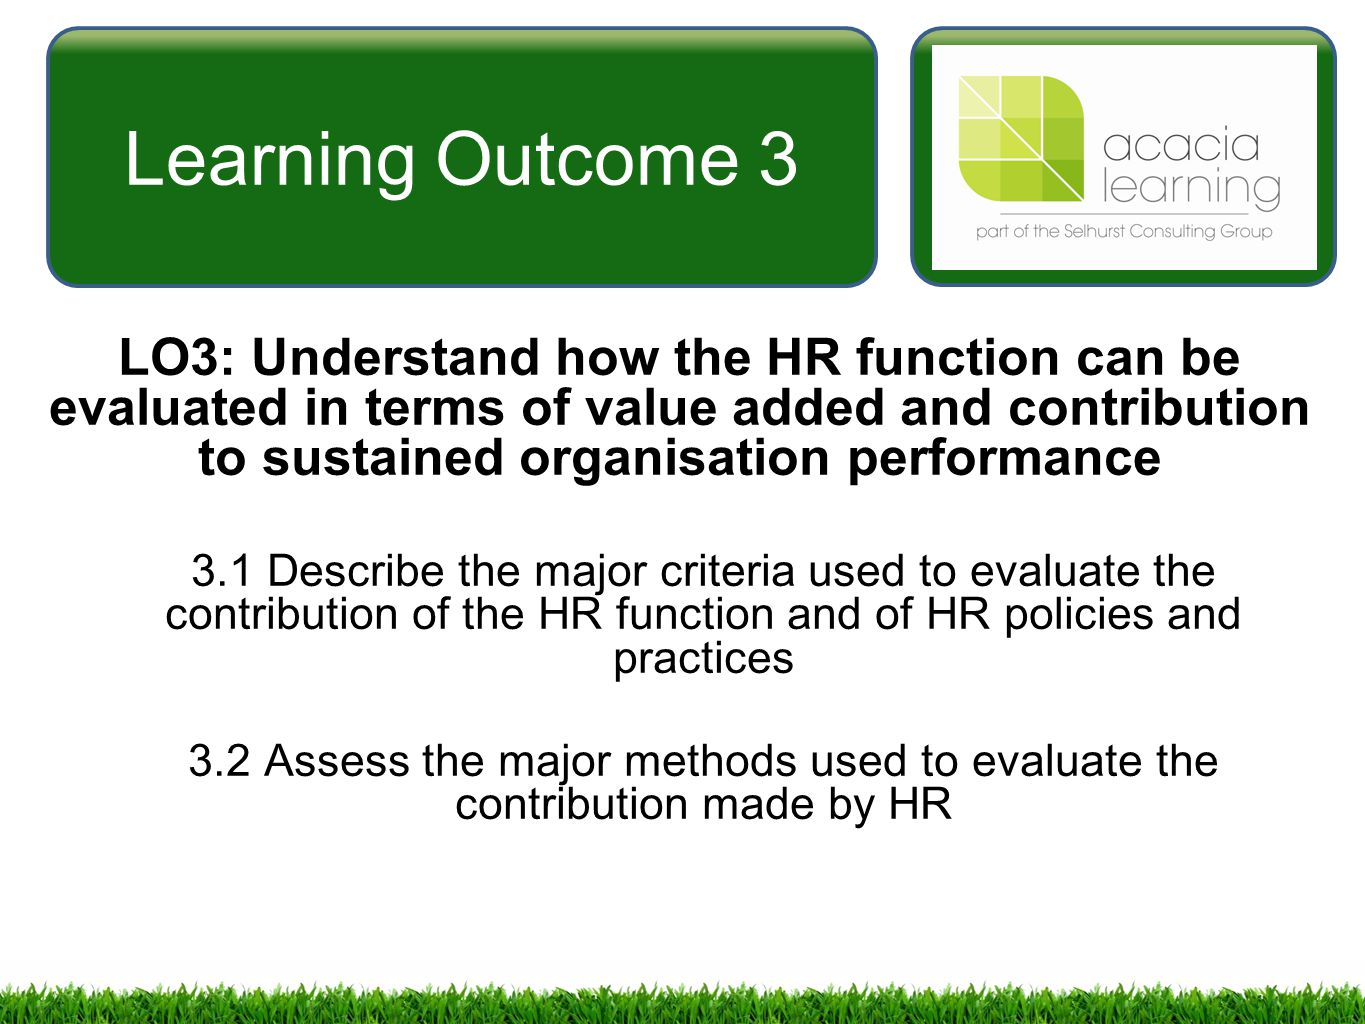 Learning Outcome 3